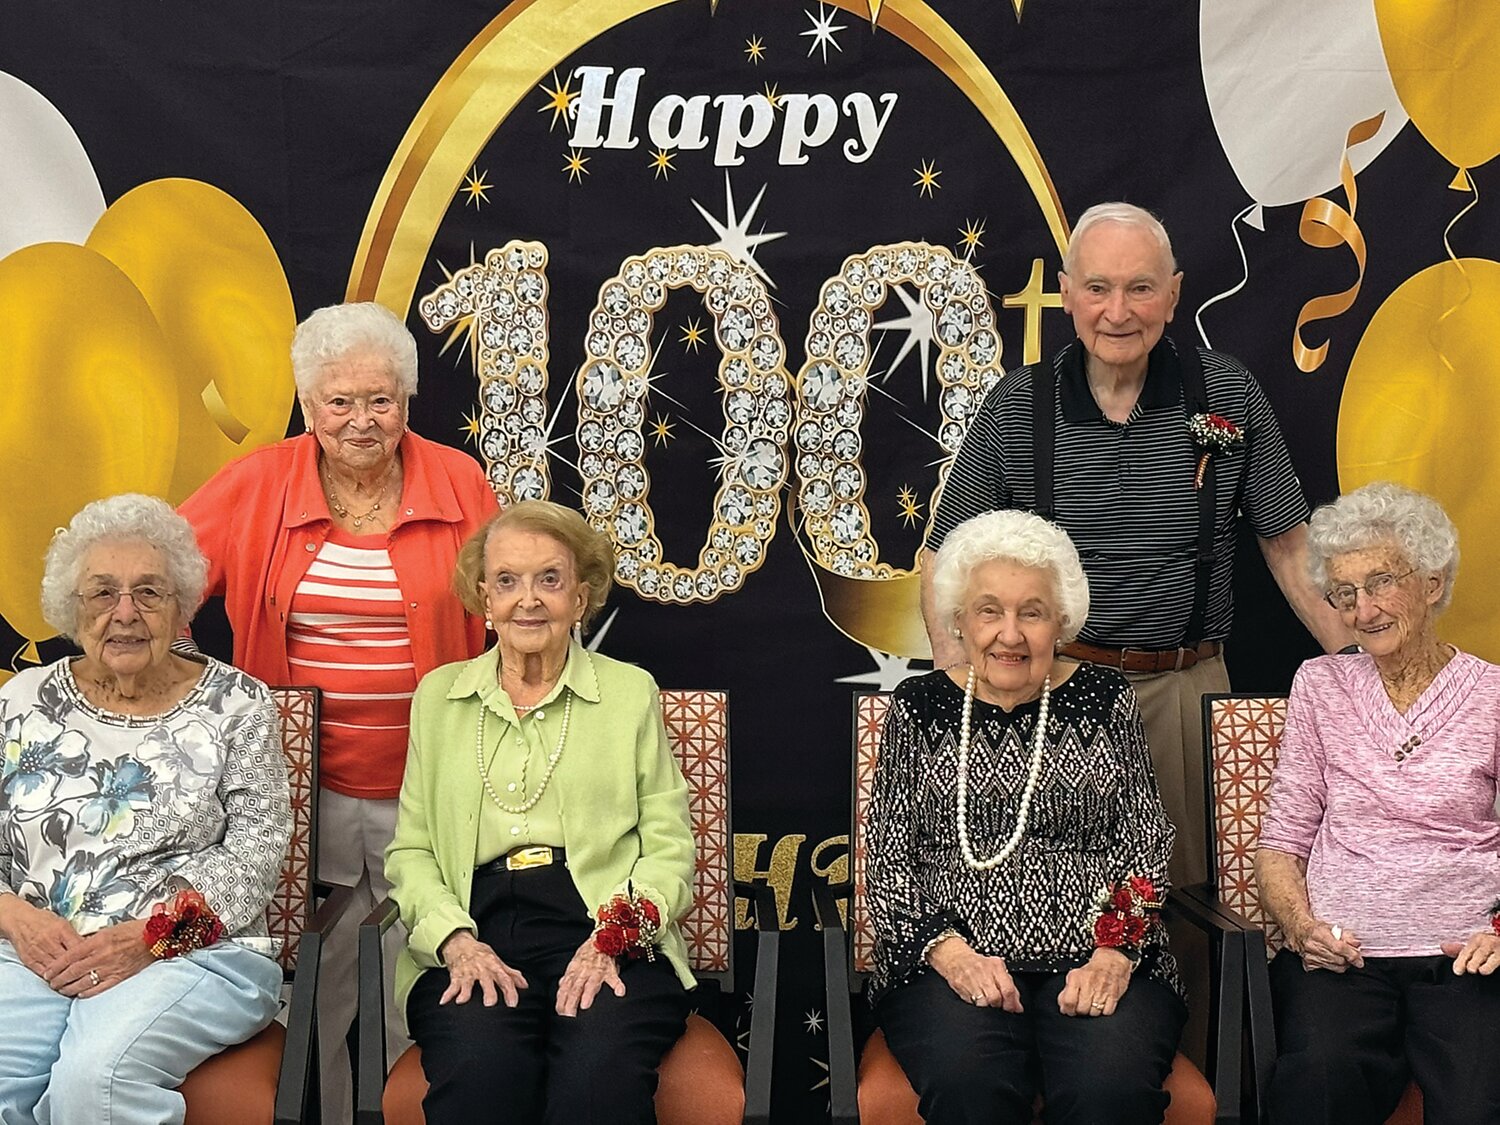 Oxford Enhanced Senior Living recently hosted a birthday bash for six residents who are celebrating 100th birthdays this year. From left are: Laura DeChico, Ann Roberts, Catherine McGinty, Hazel Worsman, Paula Spigler and Bernie Rice.